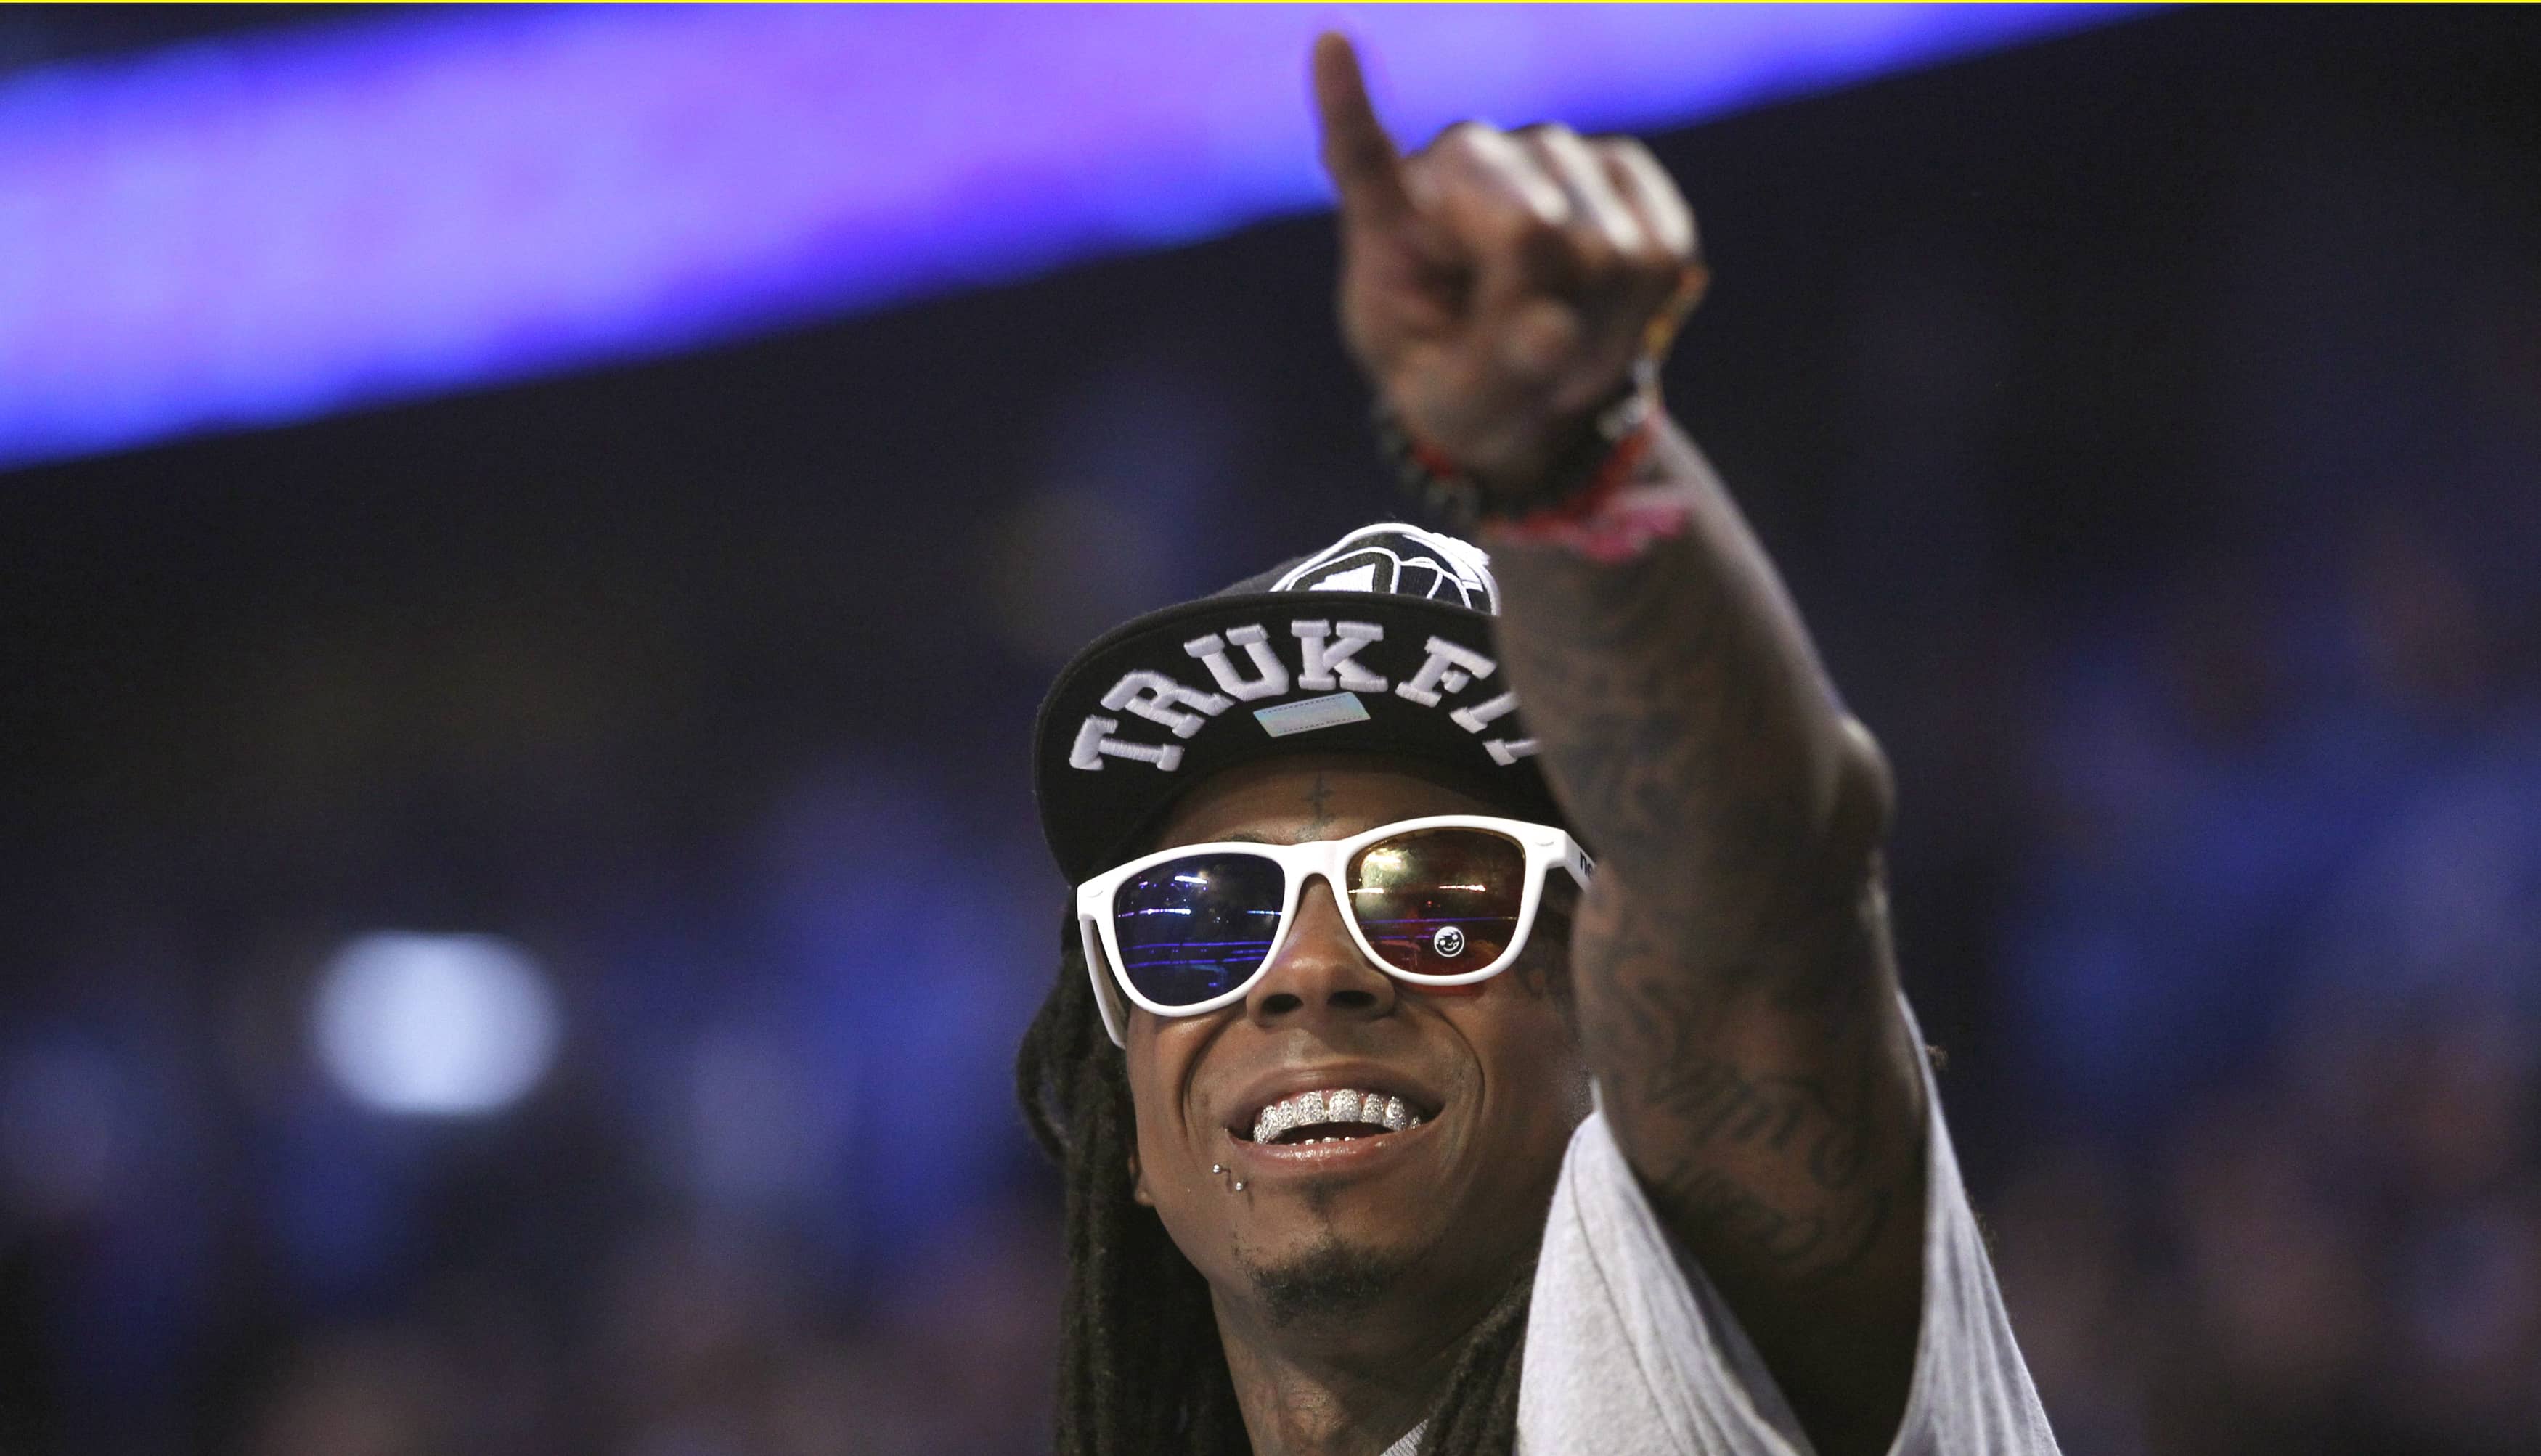 rap-artists-lil-wayne-points-courtside-during-the-nba-all-star-game-in-orlando-florida